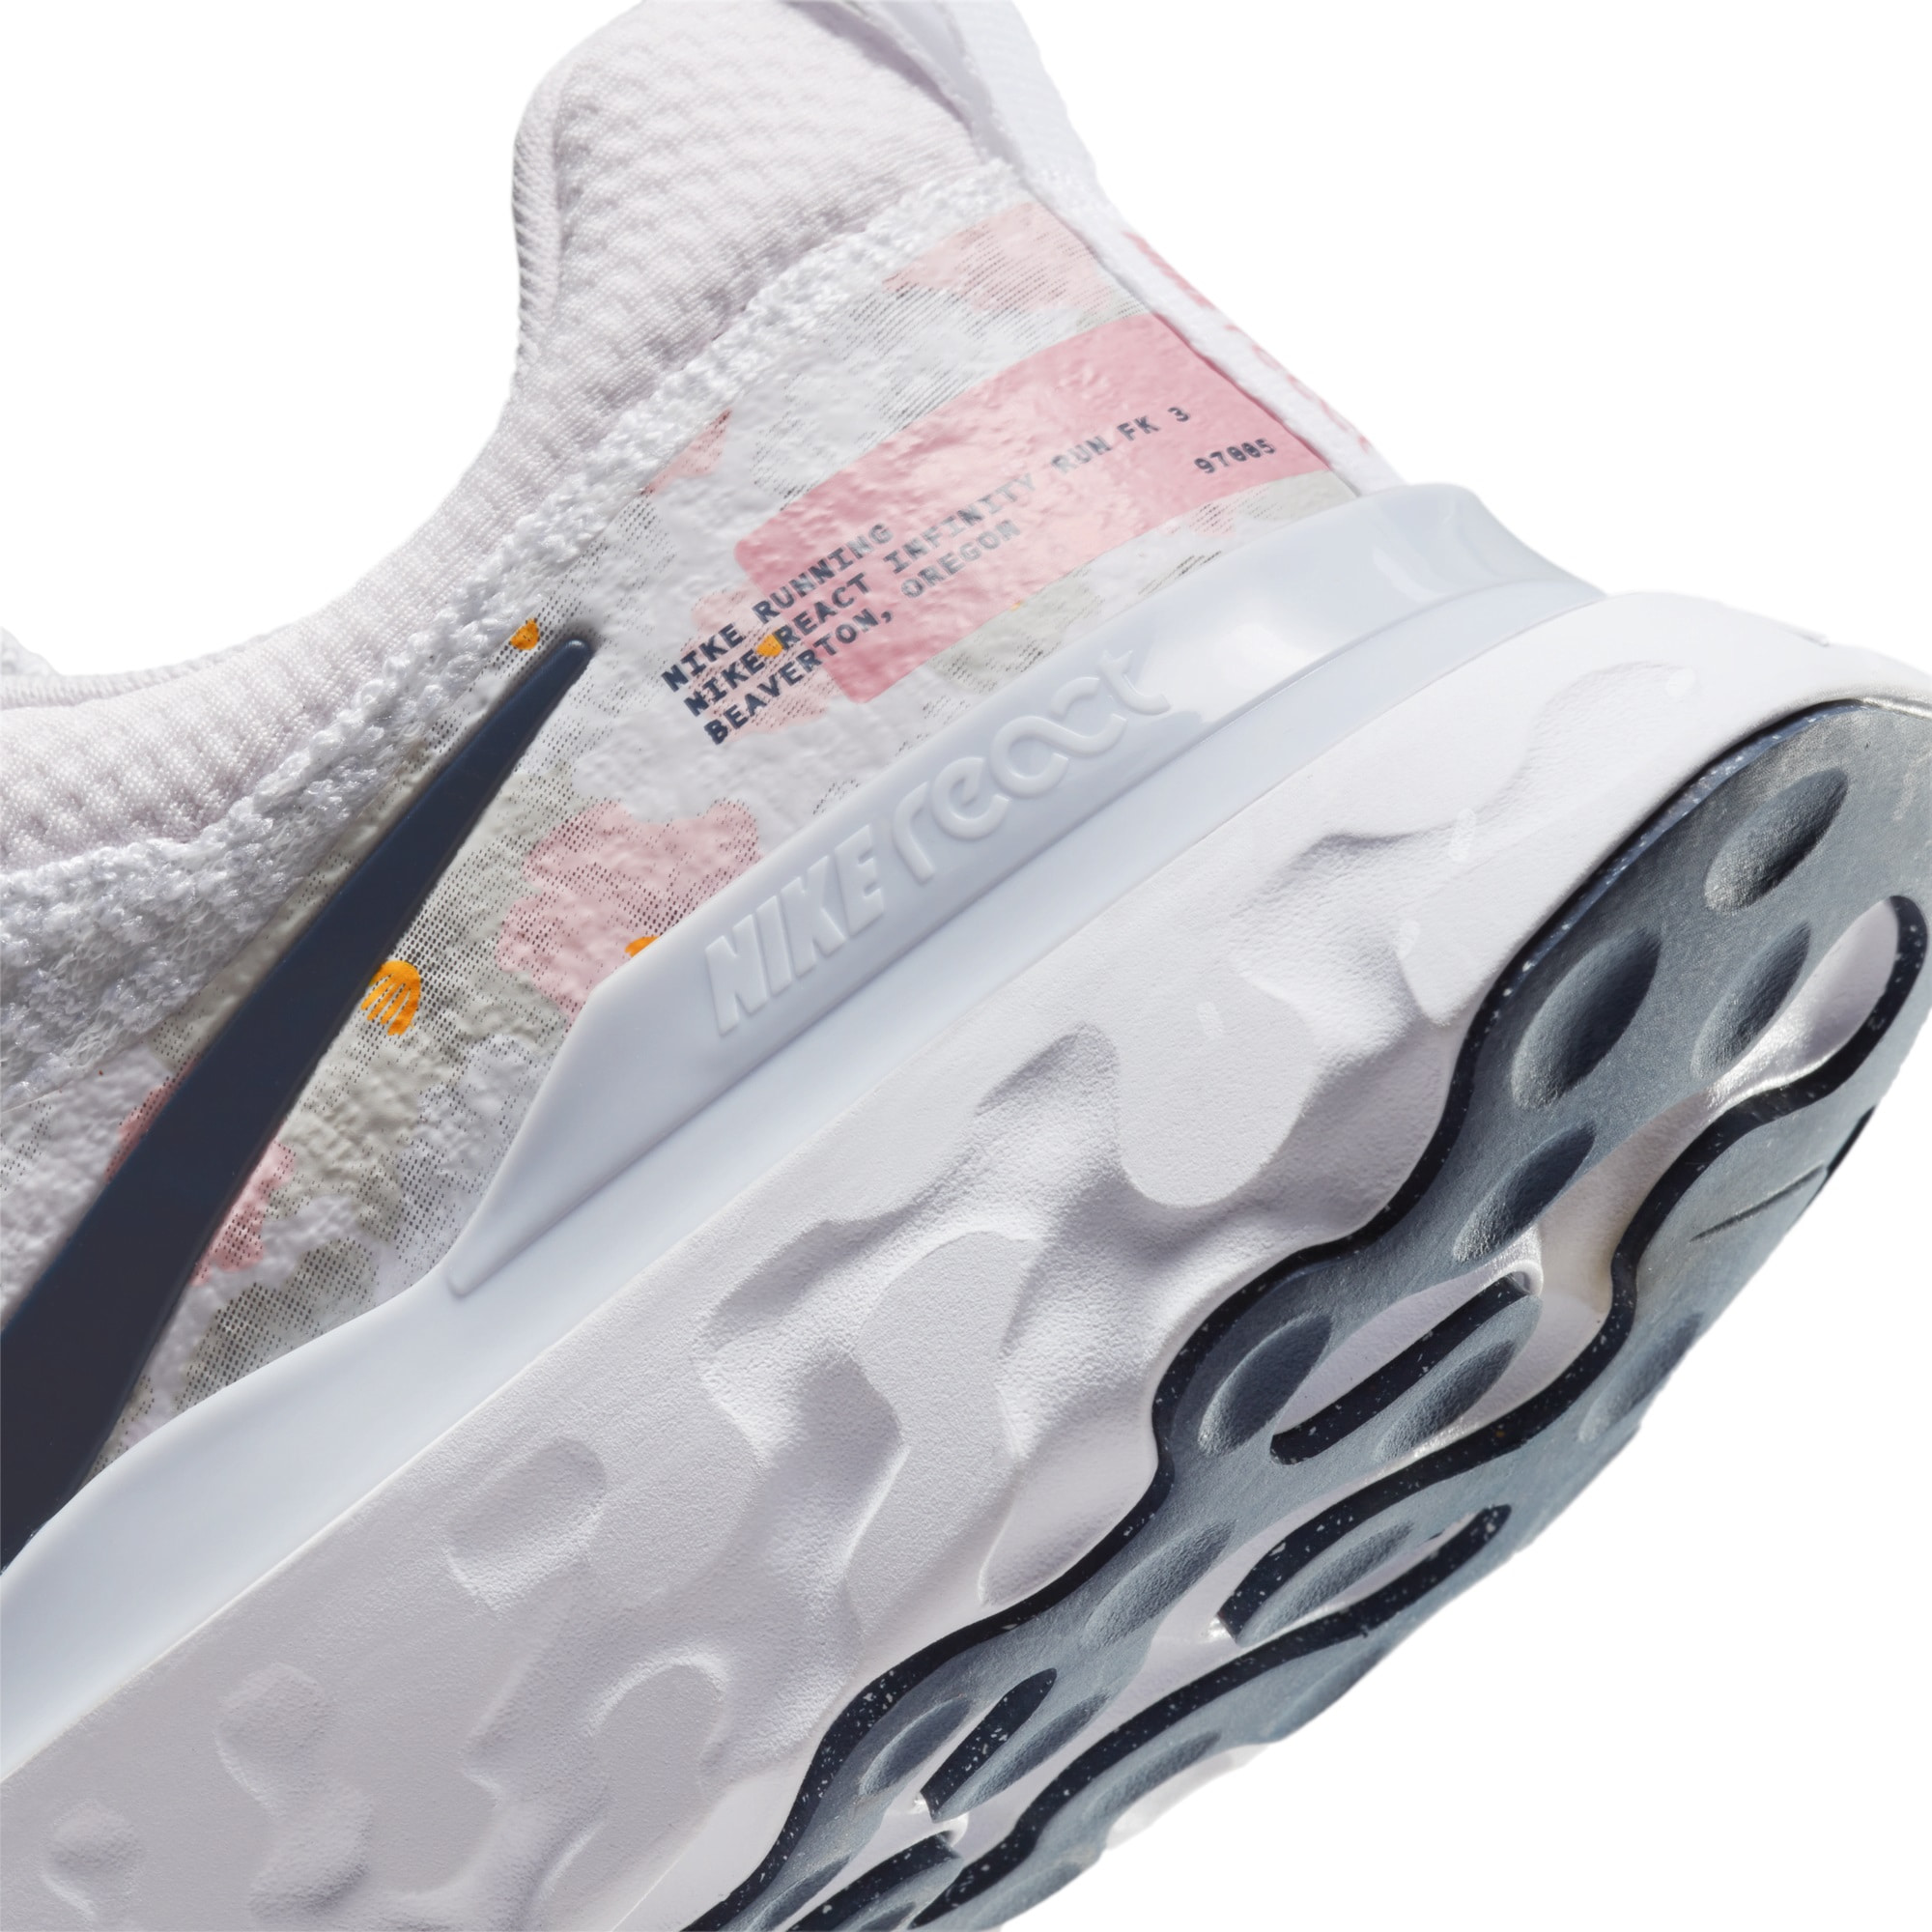 GIÀY NIKE NỮ REACT INFINITY 3 PREMIUM WHITE PEARL PINK WOMENS ROAD RUNNING SHOES FD4151-100 8